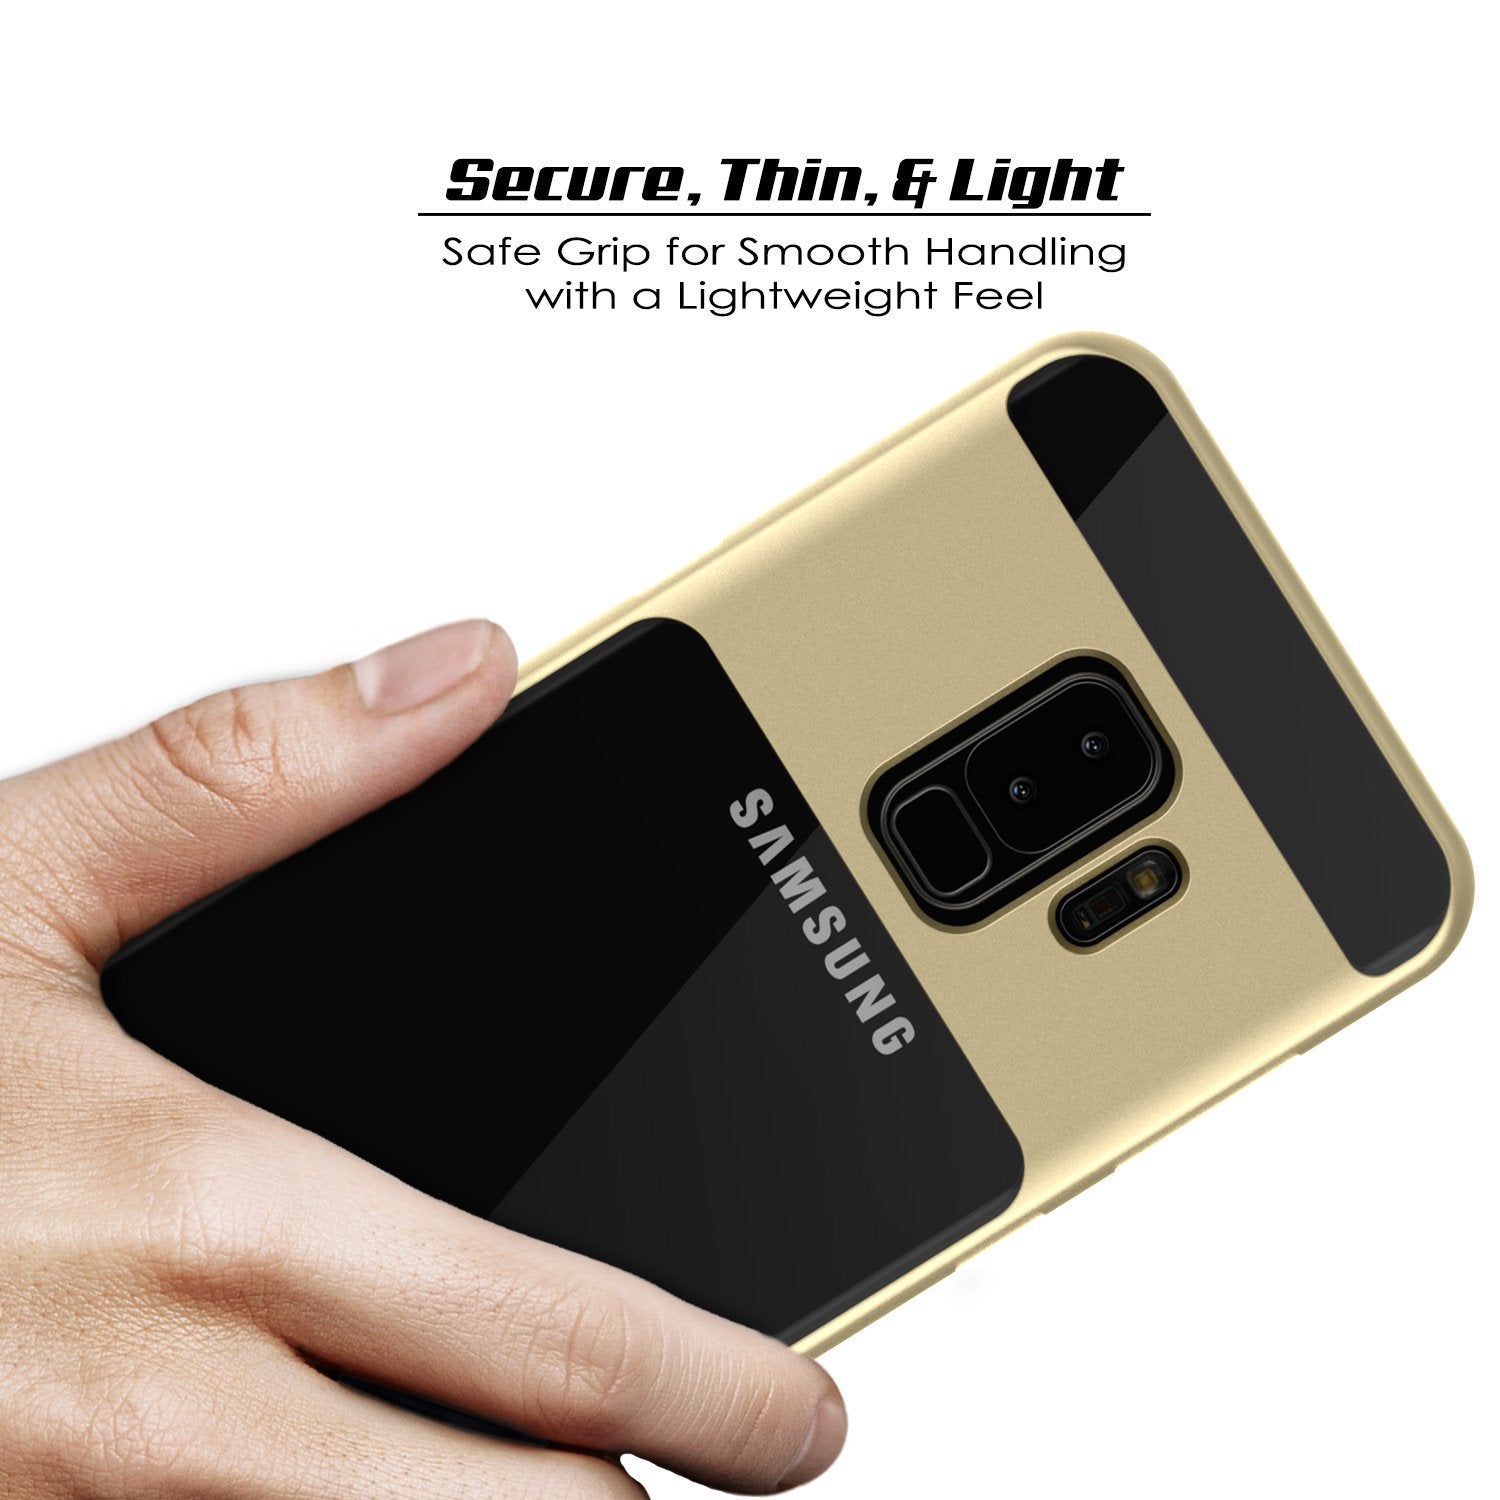 Galaxy S9+ Plus Case, PUNKcase [LUCID 3.0 Series] [Slim Fit] [Clear Back] Armor Cover w/ Integrated Kickstand, Anti-Shock System & PUNKSHIELD Screen Protector for Samsung Galaxy S9+ Plus [Gold] - PunkCase NZ